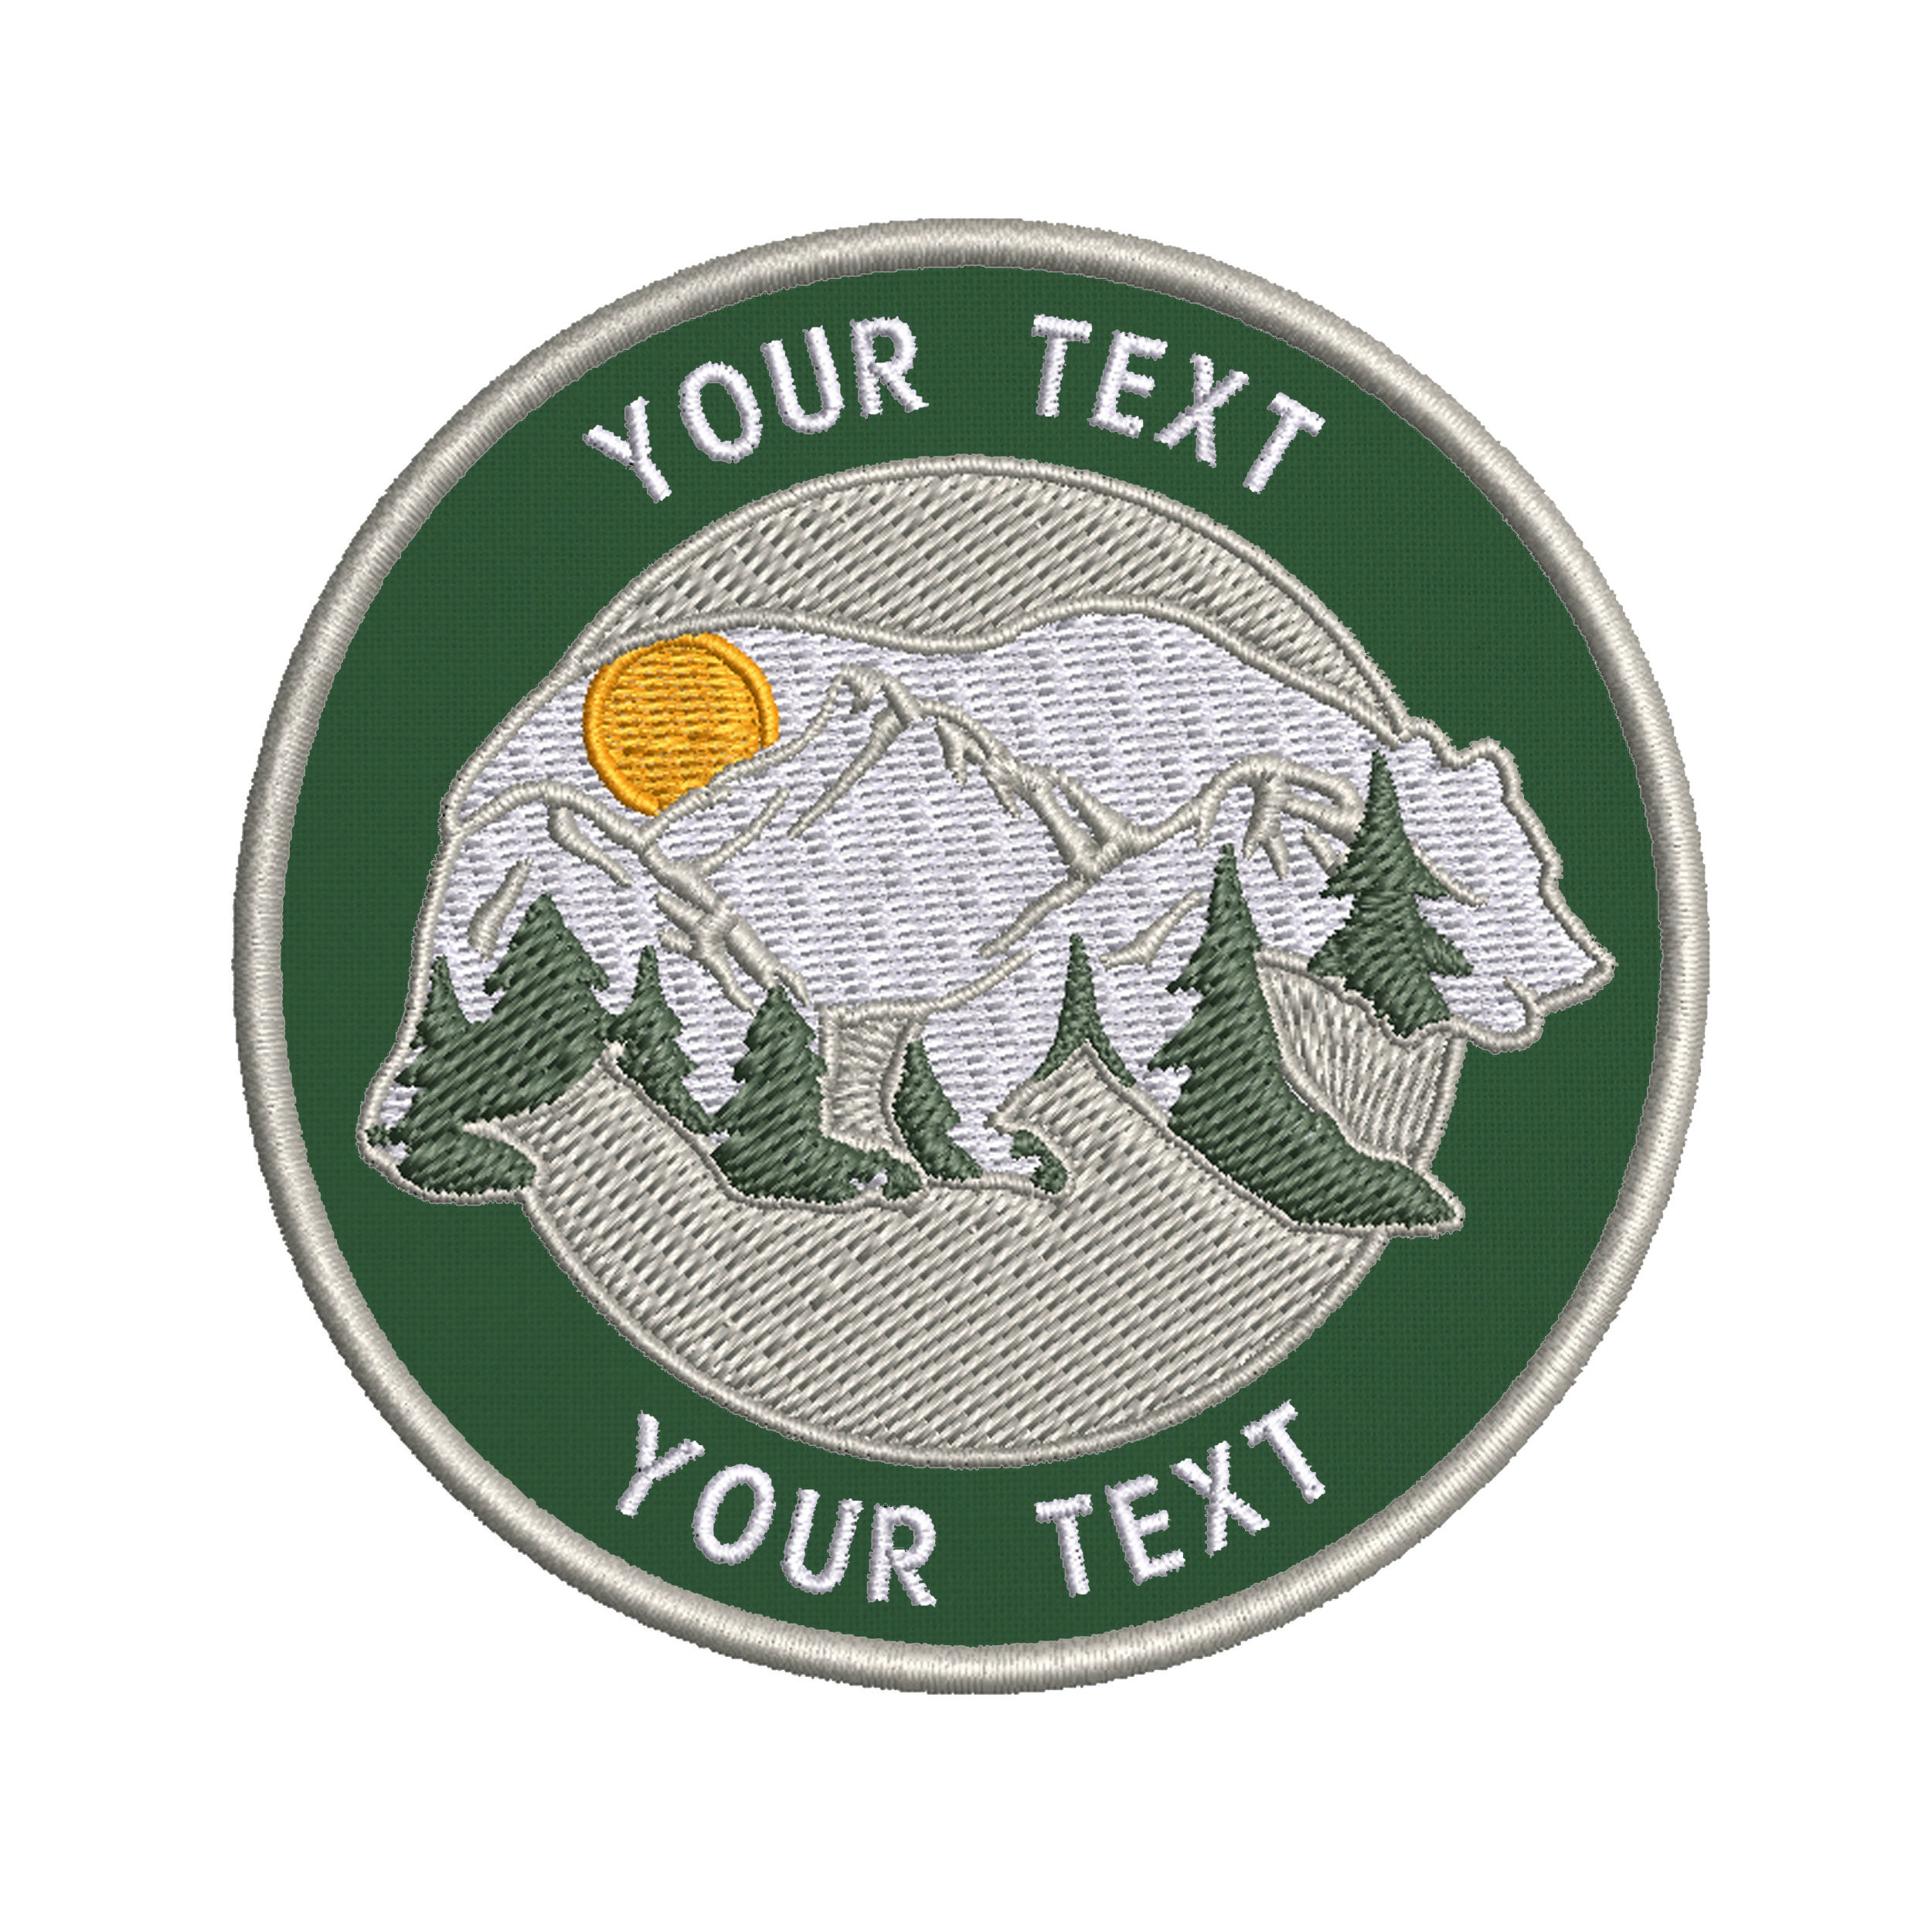 Cabin by the Lake - Catskills New York 3.5 Embroidered Patch DIY Iron-On /  Sew-On Badge Emblem - Fishing Camping Hiking Nature Animals - Decorative  Novelty Souvenir Applique 